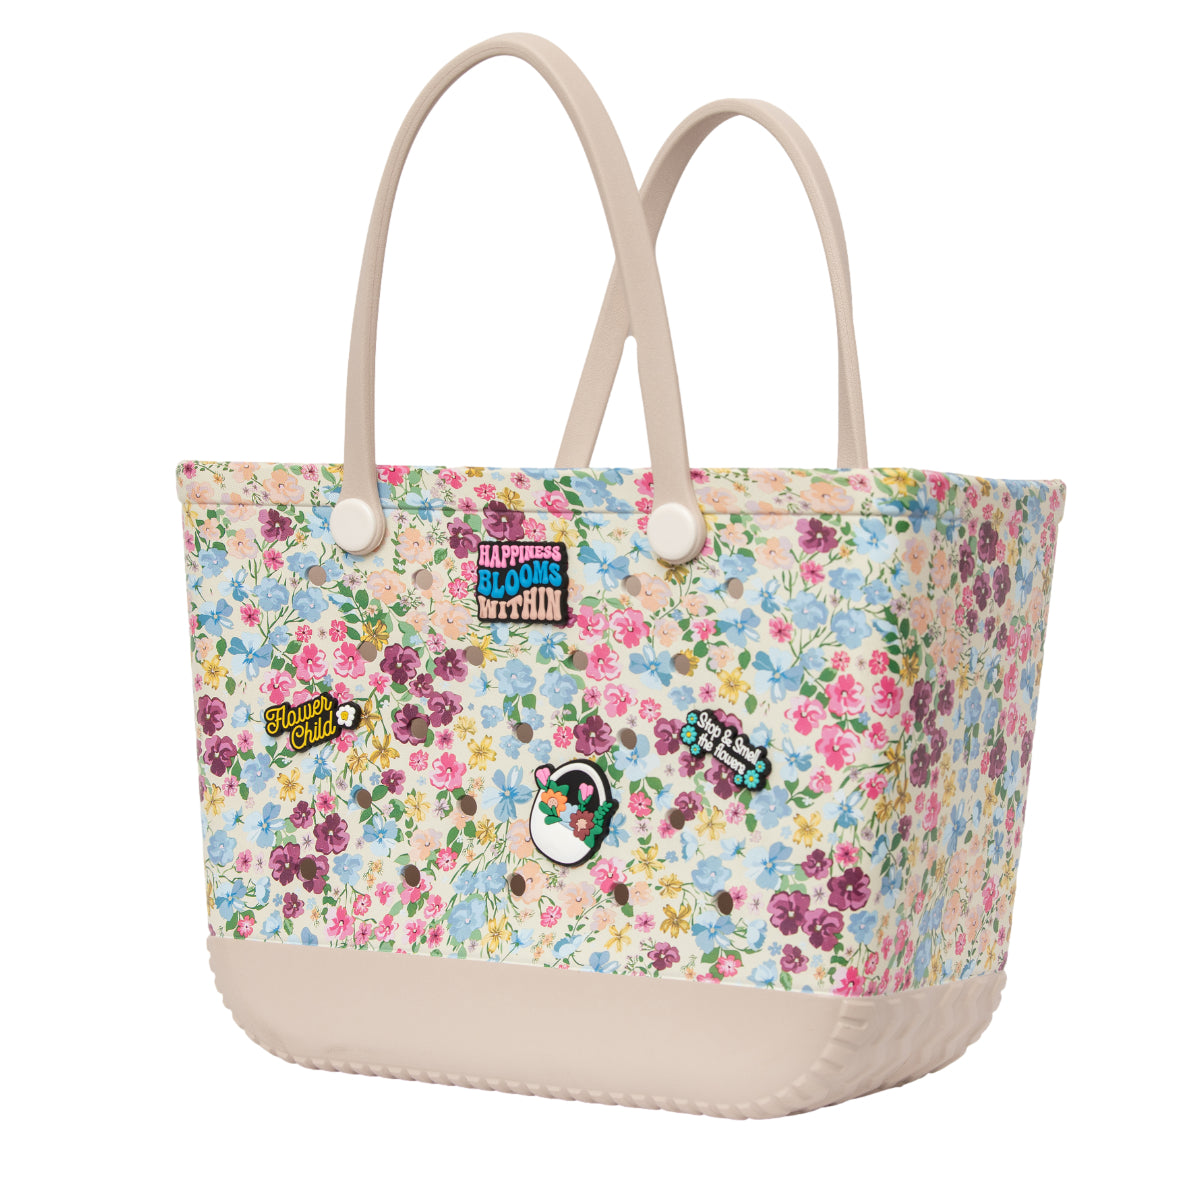 Flower Printed Large Beach Tote Bags (12 units) –